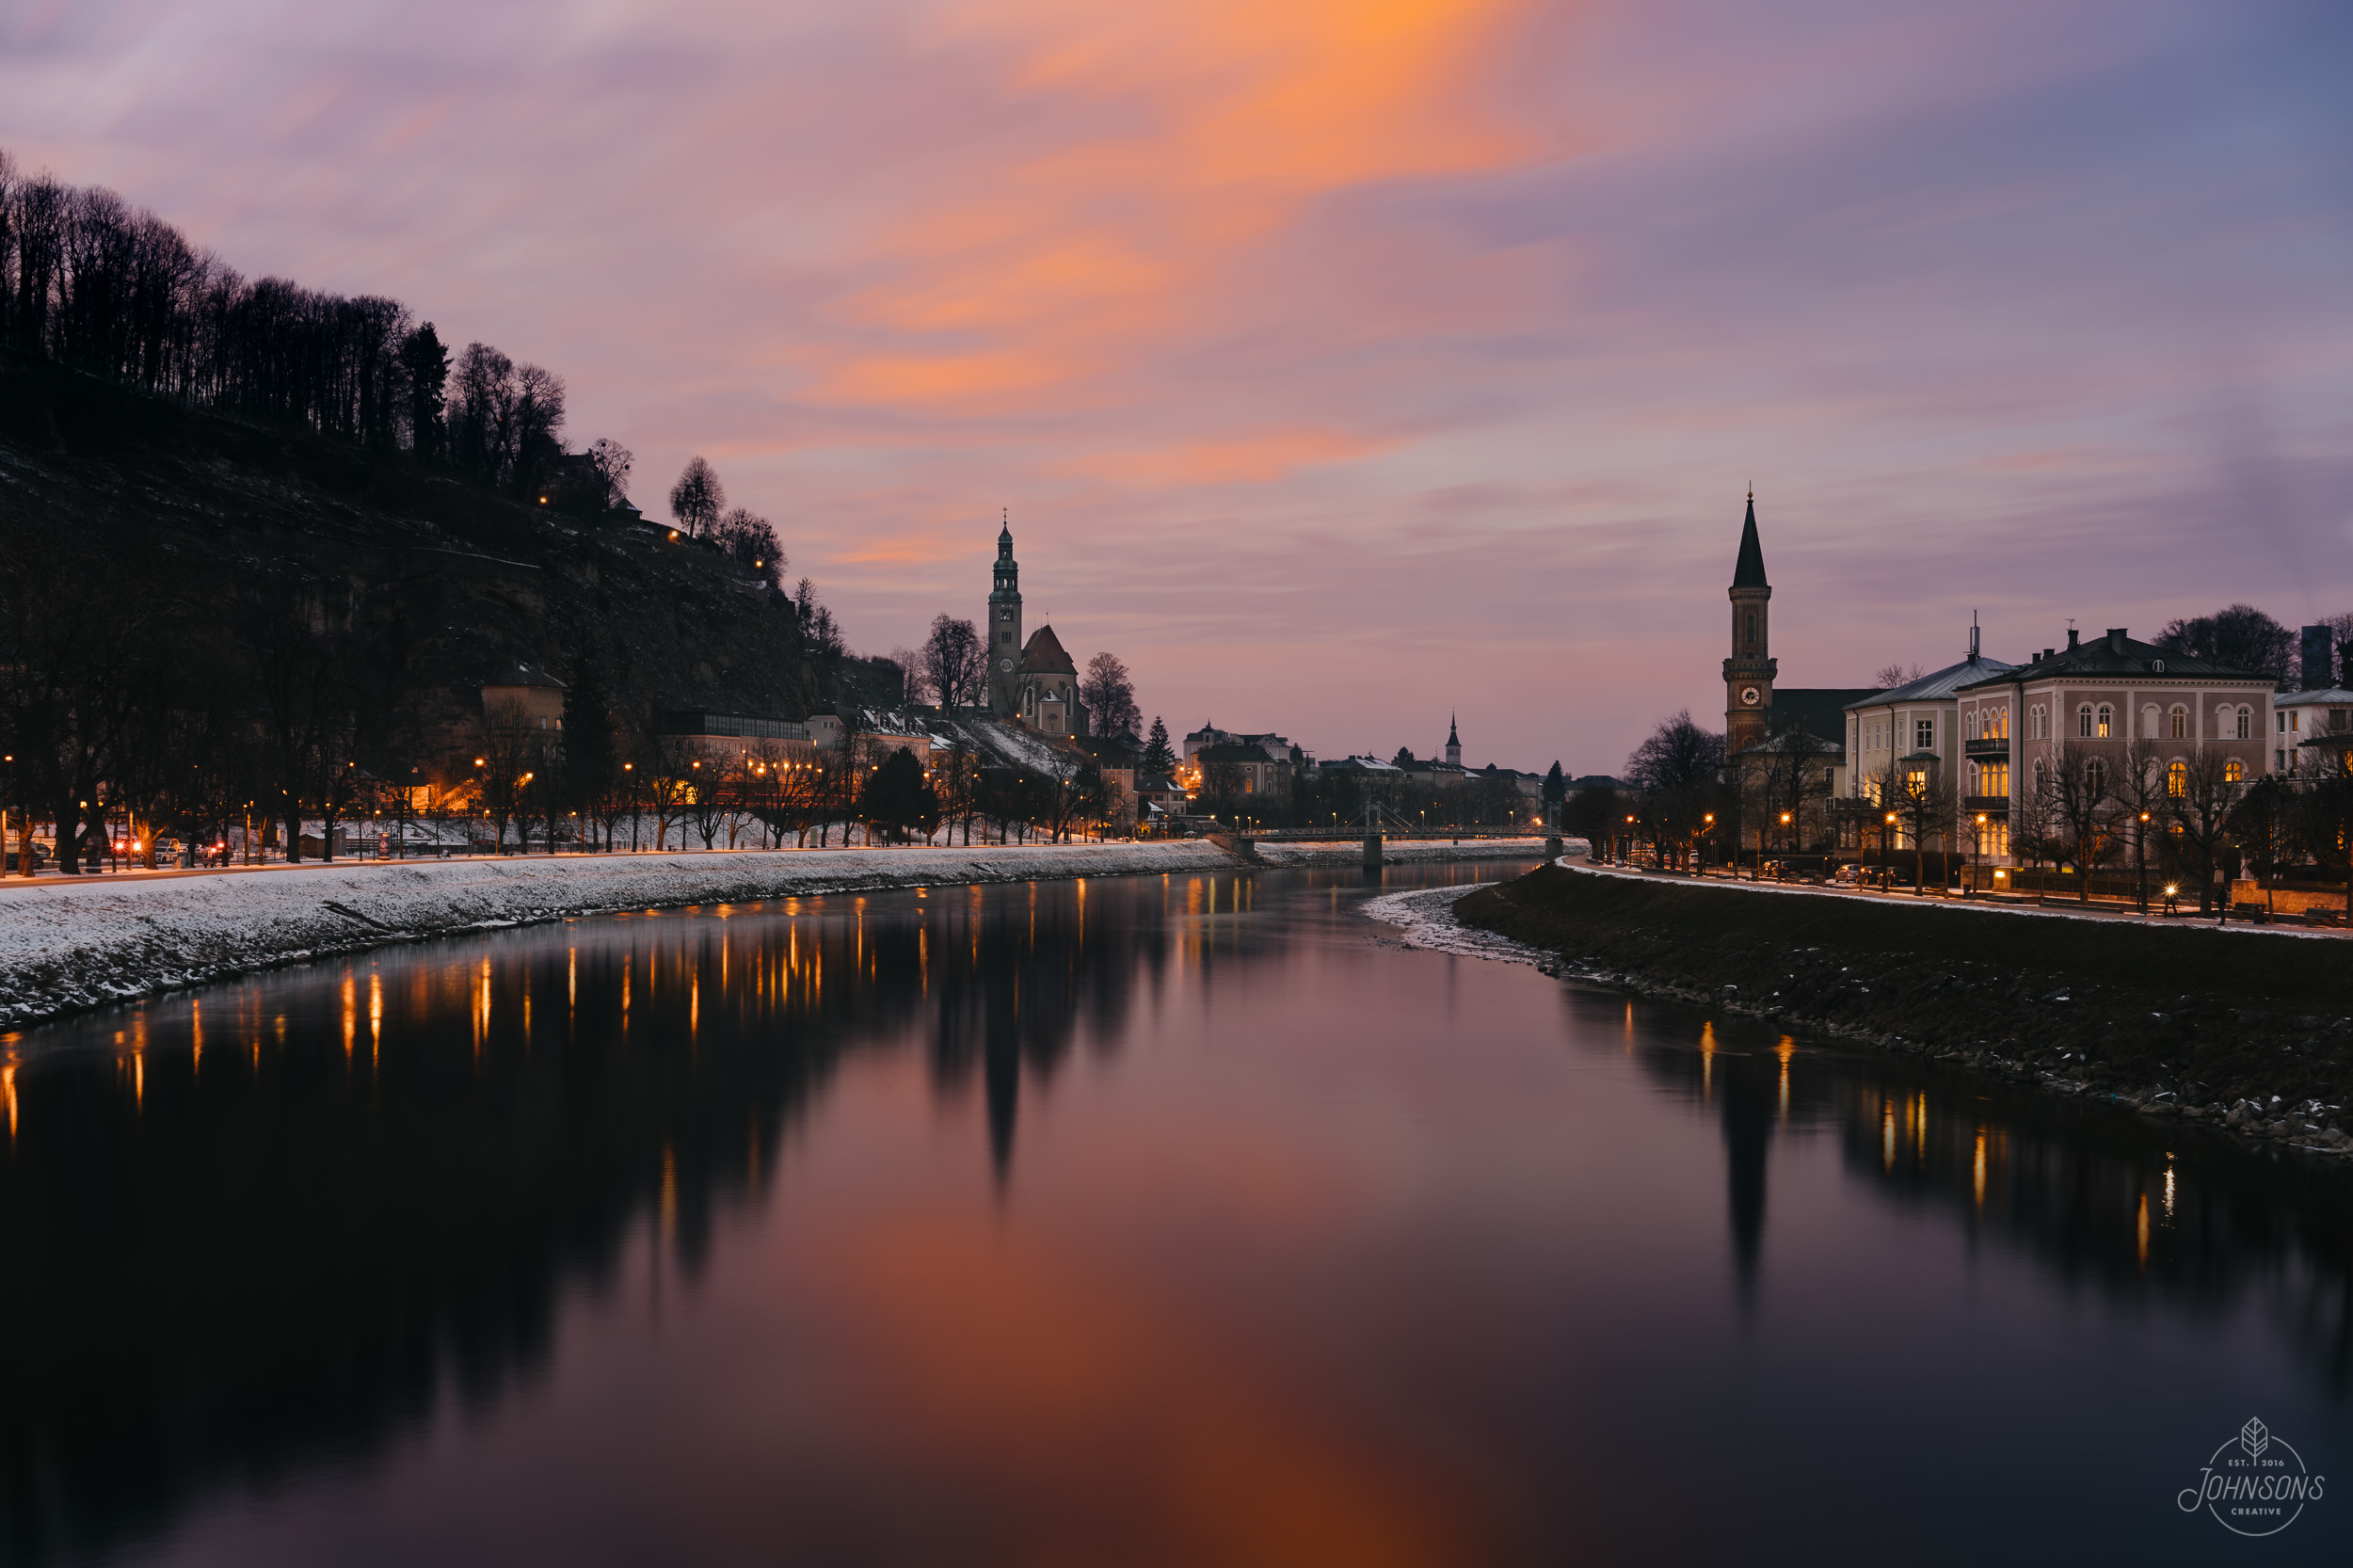  Sony a7rii |&nbsp;35mm 2.8 |&nbsp;f11 |&nbsp;8 sec |&nbsp;ISO 100 | Streetlights composited in to sunset photograph  The Salzach runs right through the Old Town, and there are several pedestrian only bridges that cross. This is looking NW from the M